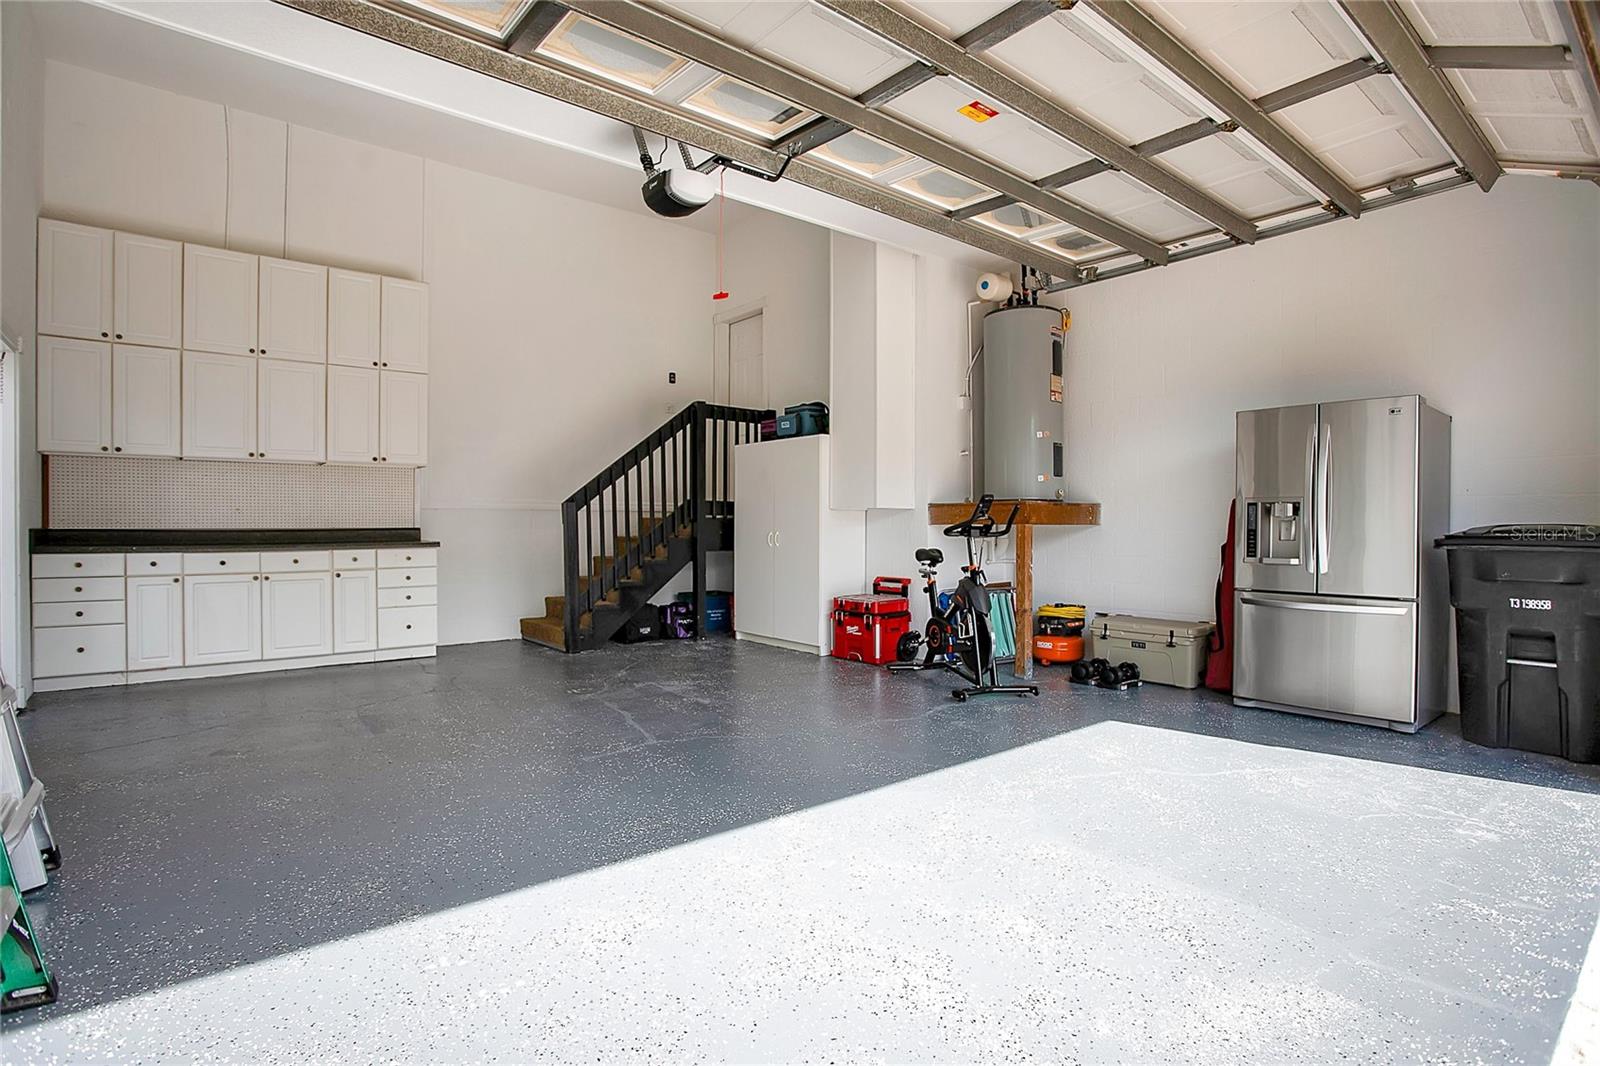 2 car garage with caninets